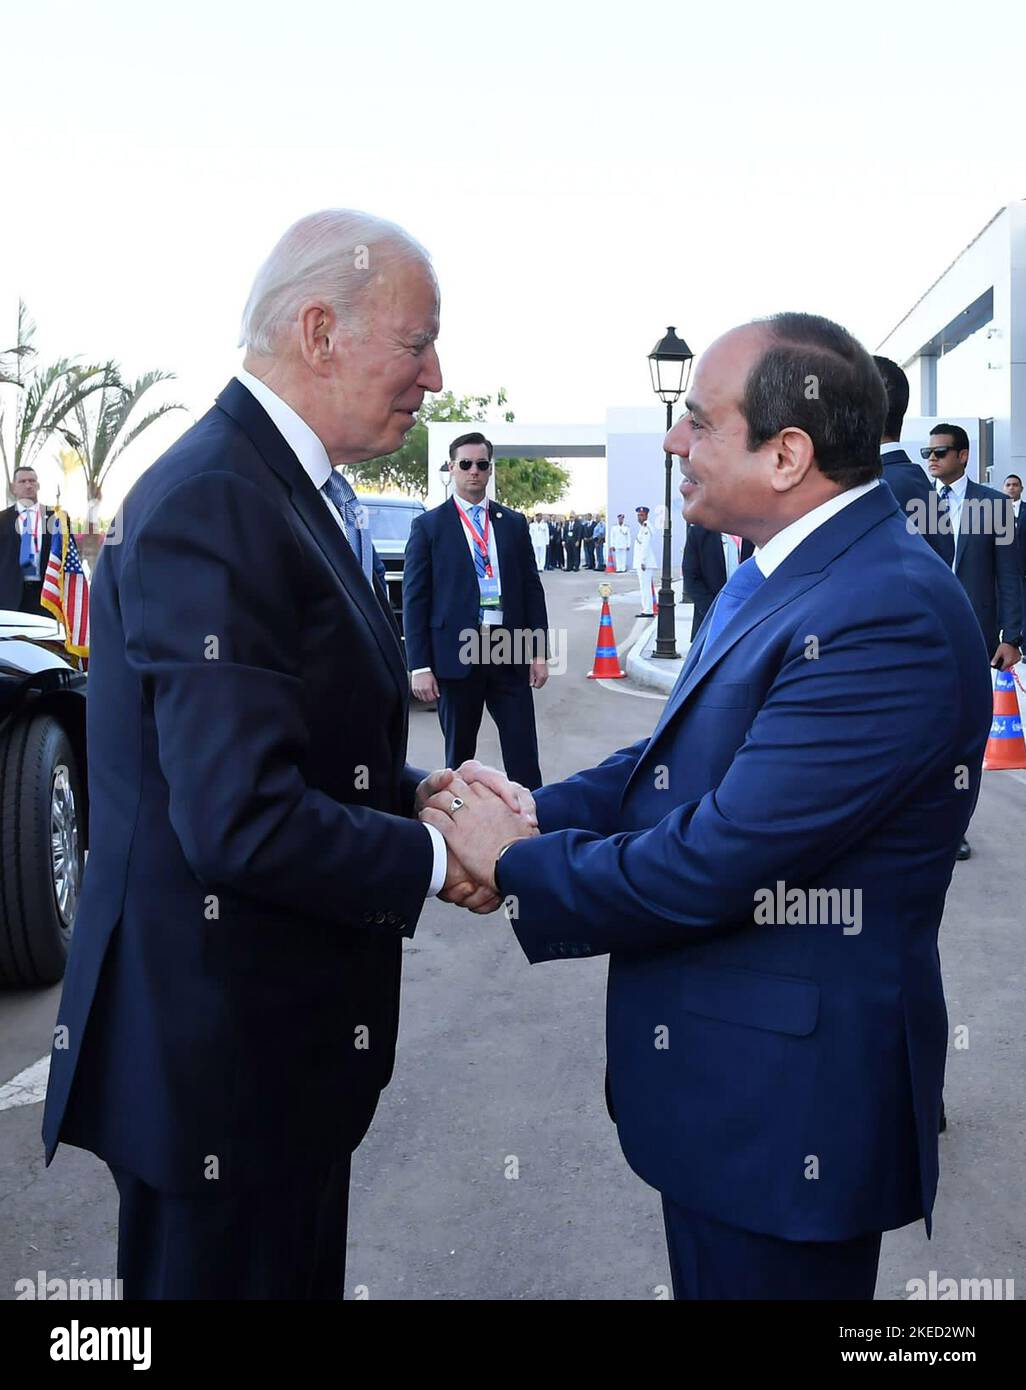 Sharm El Sheikh, Egypt. 11th Nov, 2022. Egyptian President Abdel Fattah el-Sisi welcomes US President Joe Biden upon his arrival to attend the 2022 United Nations Climate Change Conference, more commonly known as COP27, at the Sharm El Sheikh International Convention Centre, in Egypt's Red Sea resort of Sharm El Sheikh, Egypt on Friday on November 11, 2022 . Photo by Egyptian President Press Office/UPI Credit: UPI/Alamy Live News Stock Photo